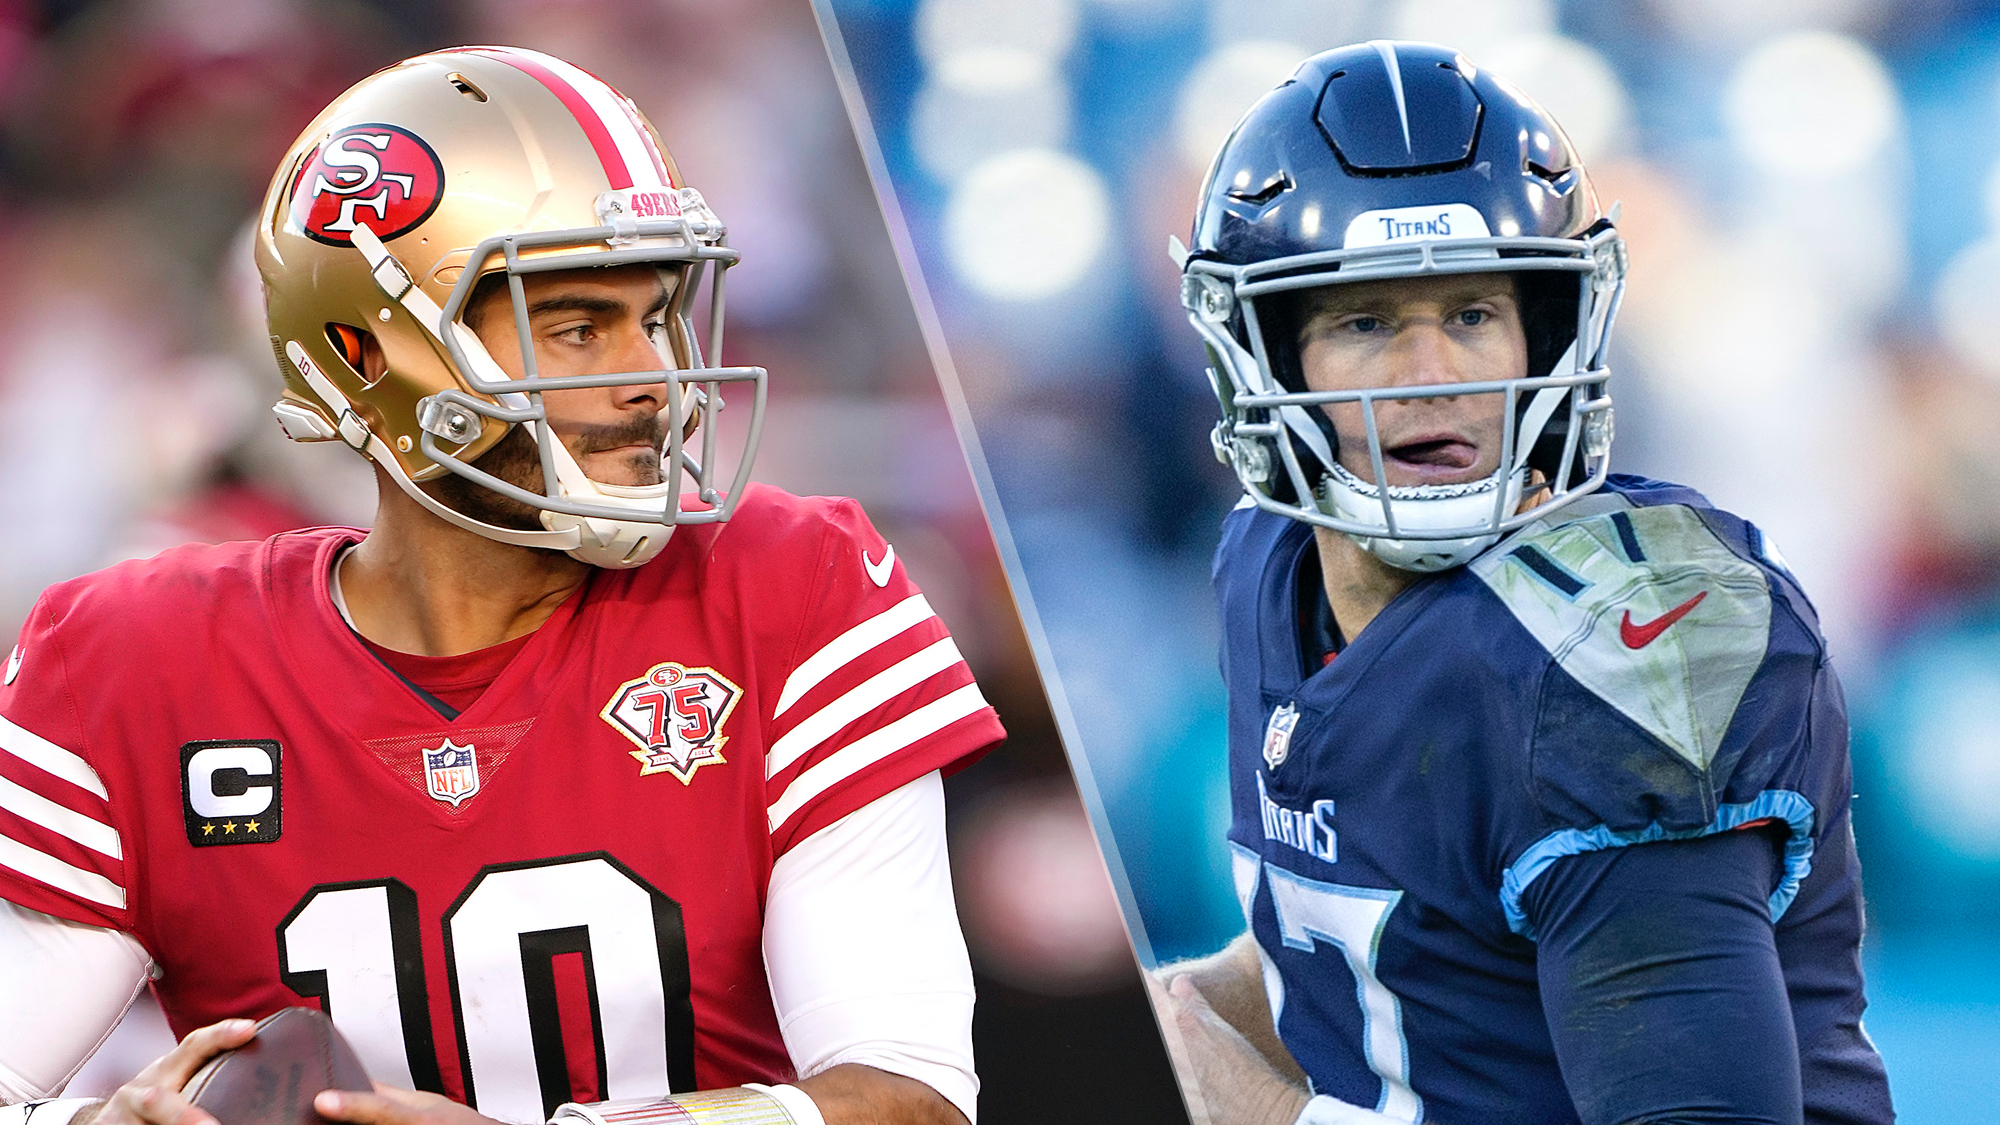 49ers vs Titans live stream: How to watch Thursday Night Football